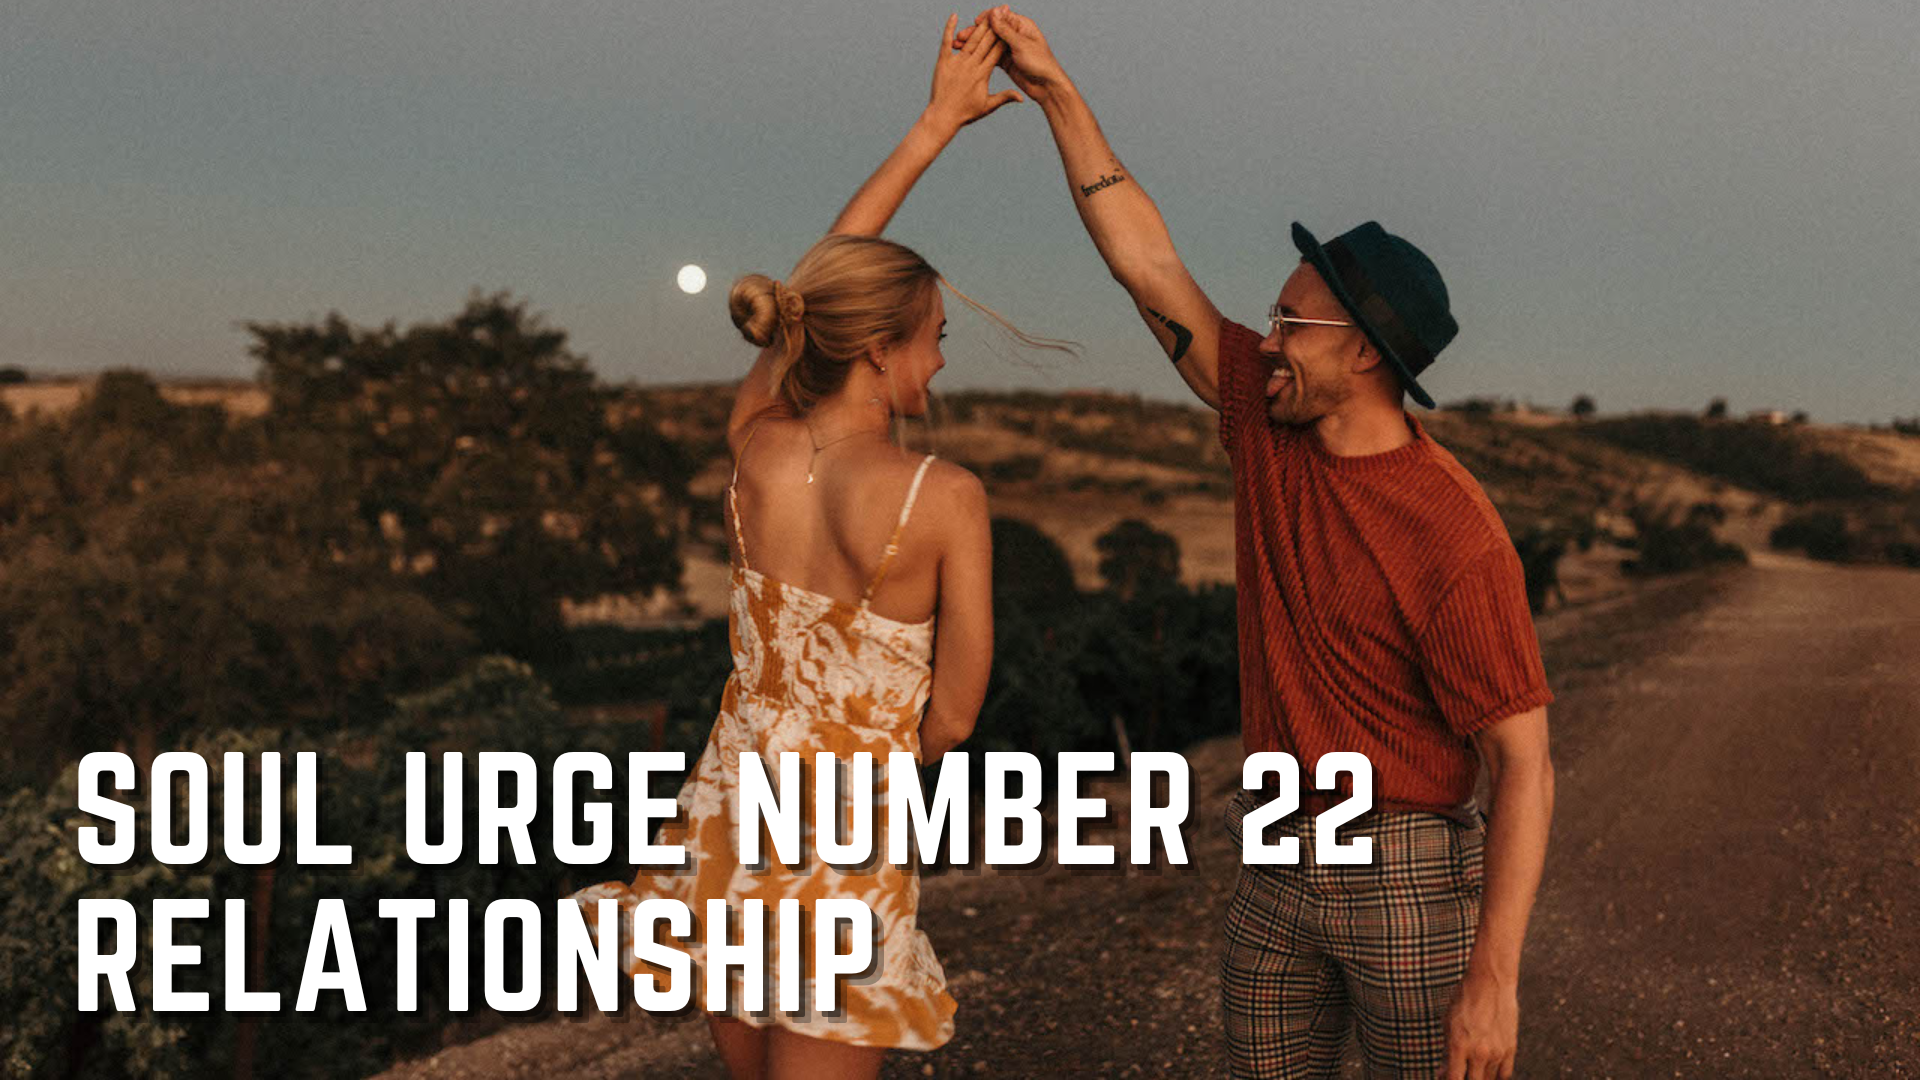 A couple dancing together in the road with words Soul Urge Number 22 Relationships